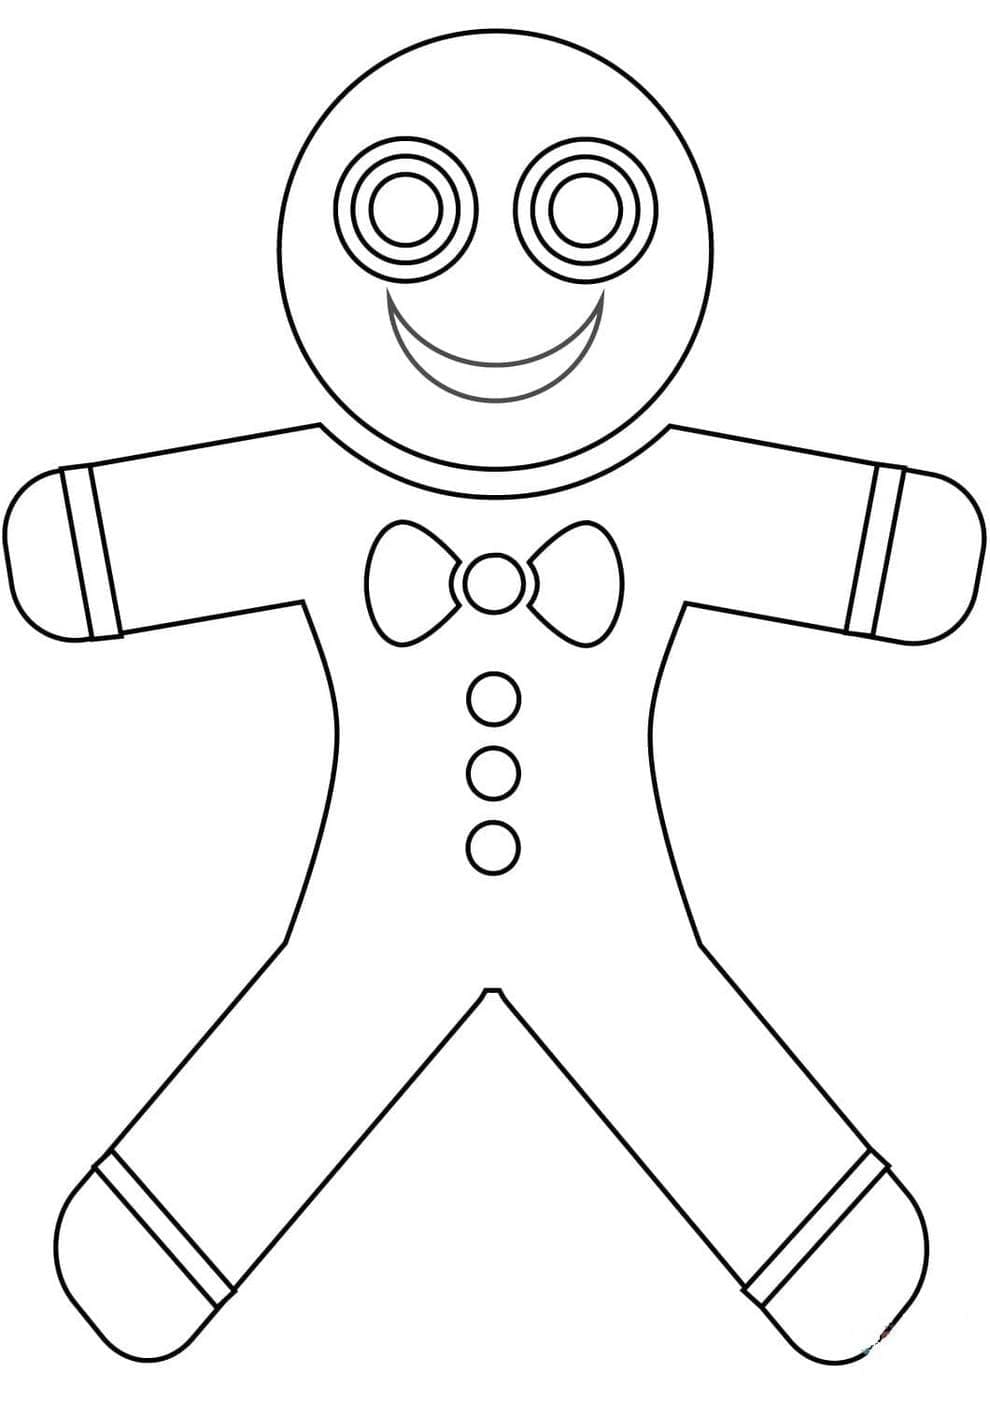 Gingerbread Man 1 coloring page